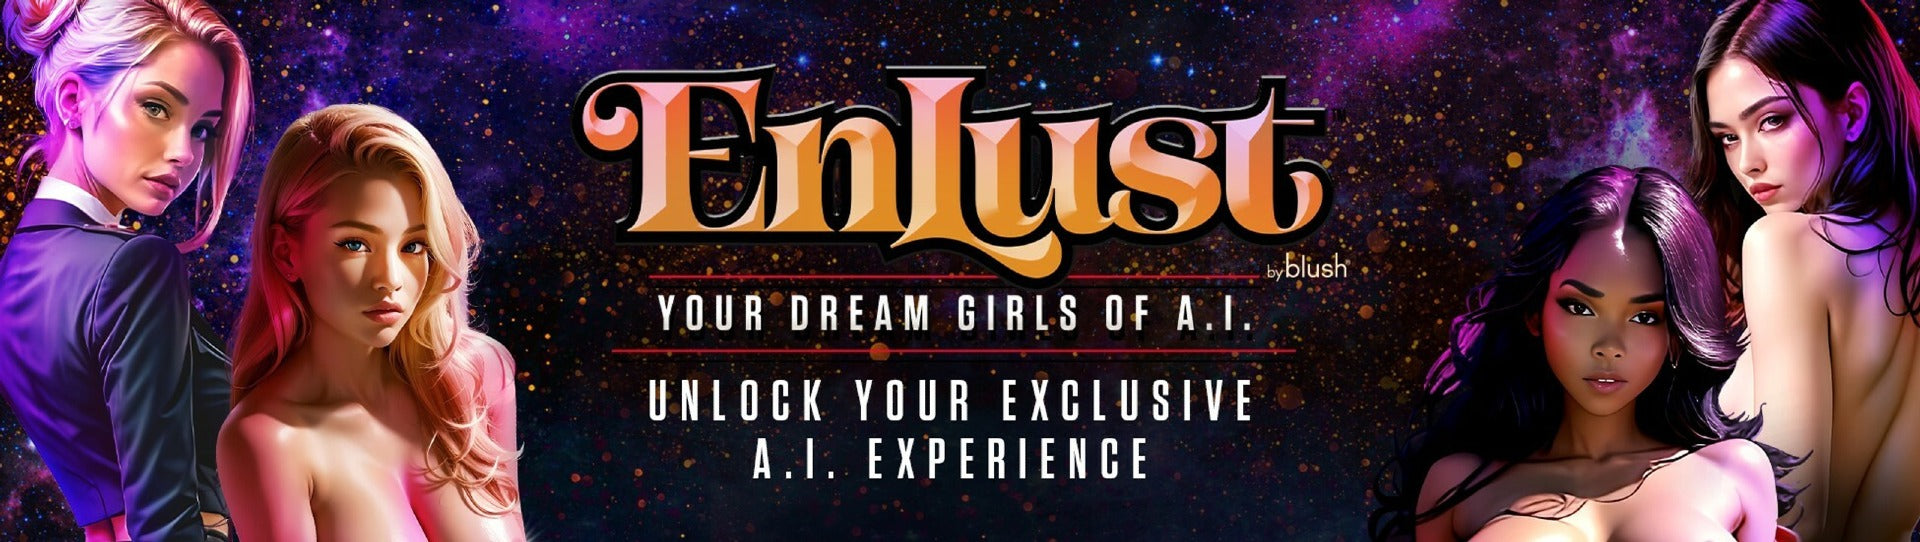 EnLust Your dream girls of A.I. Unlock your exclusive A.I. Experience. On both sides are various A.I genrated women that feature on the product.